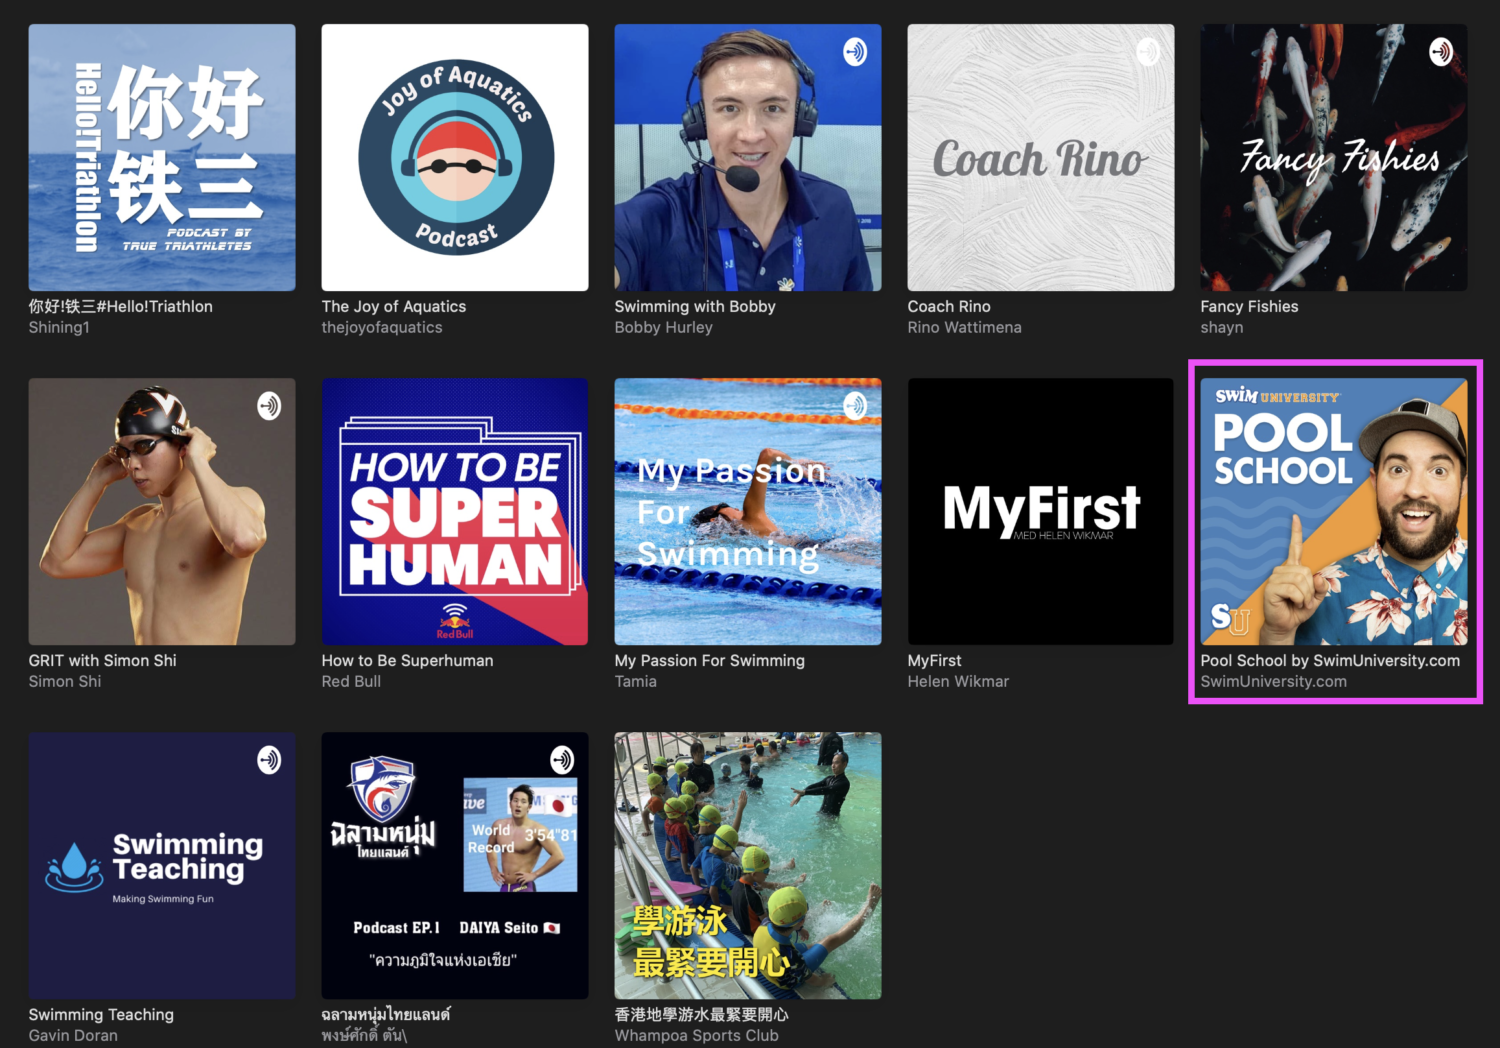 Ranked 35th in Apple Podcast Swimming Category